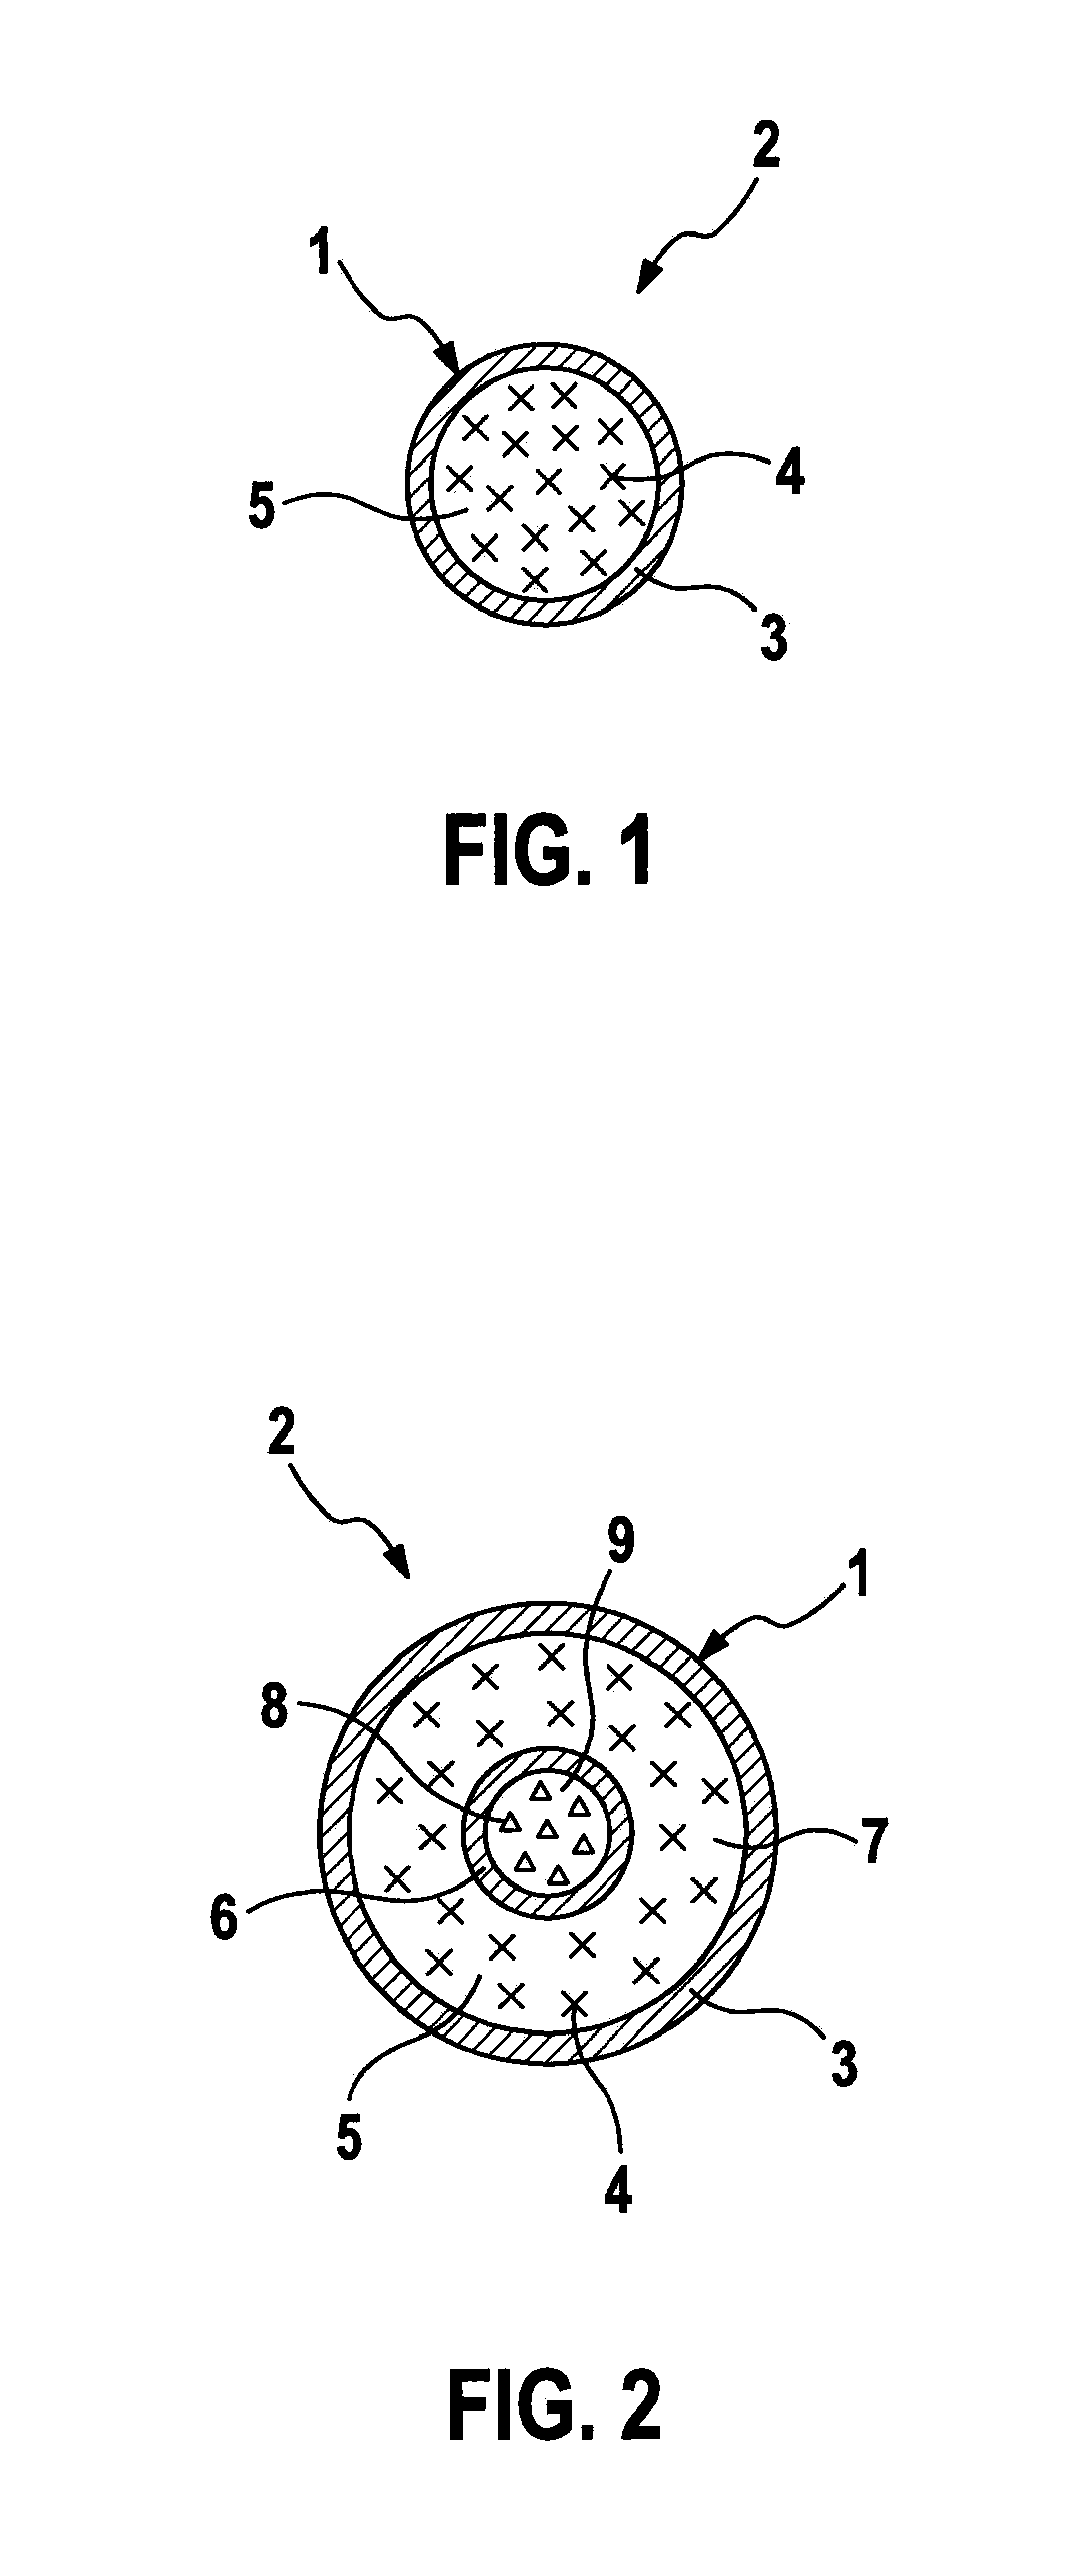 Additive for an electrolyte of a lithium-based secondary battery cell